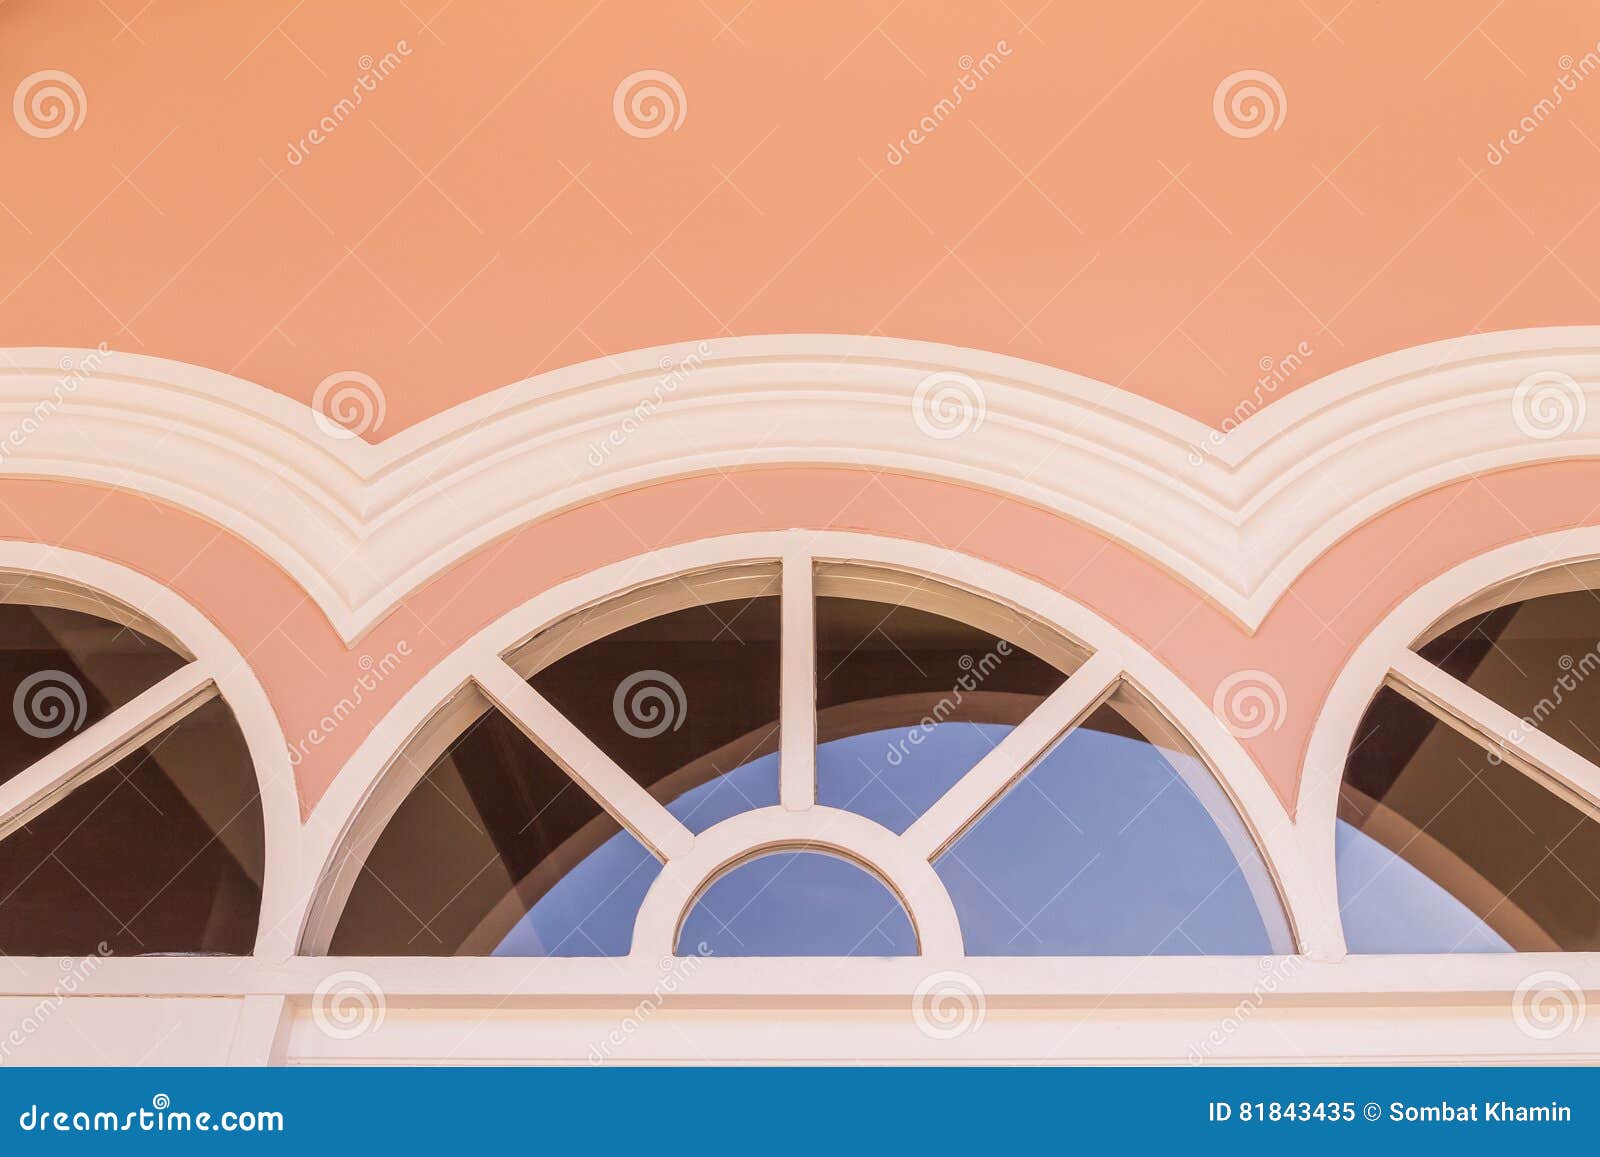 top part of window on top of door of chino-portuguese architectural style